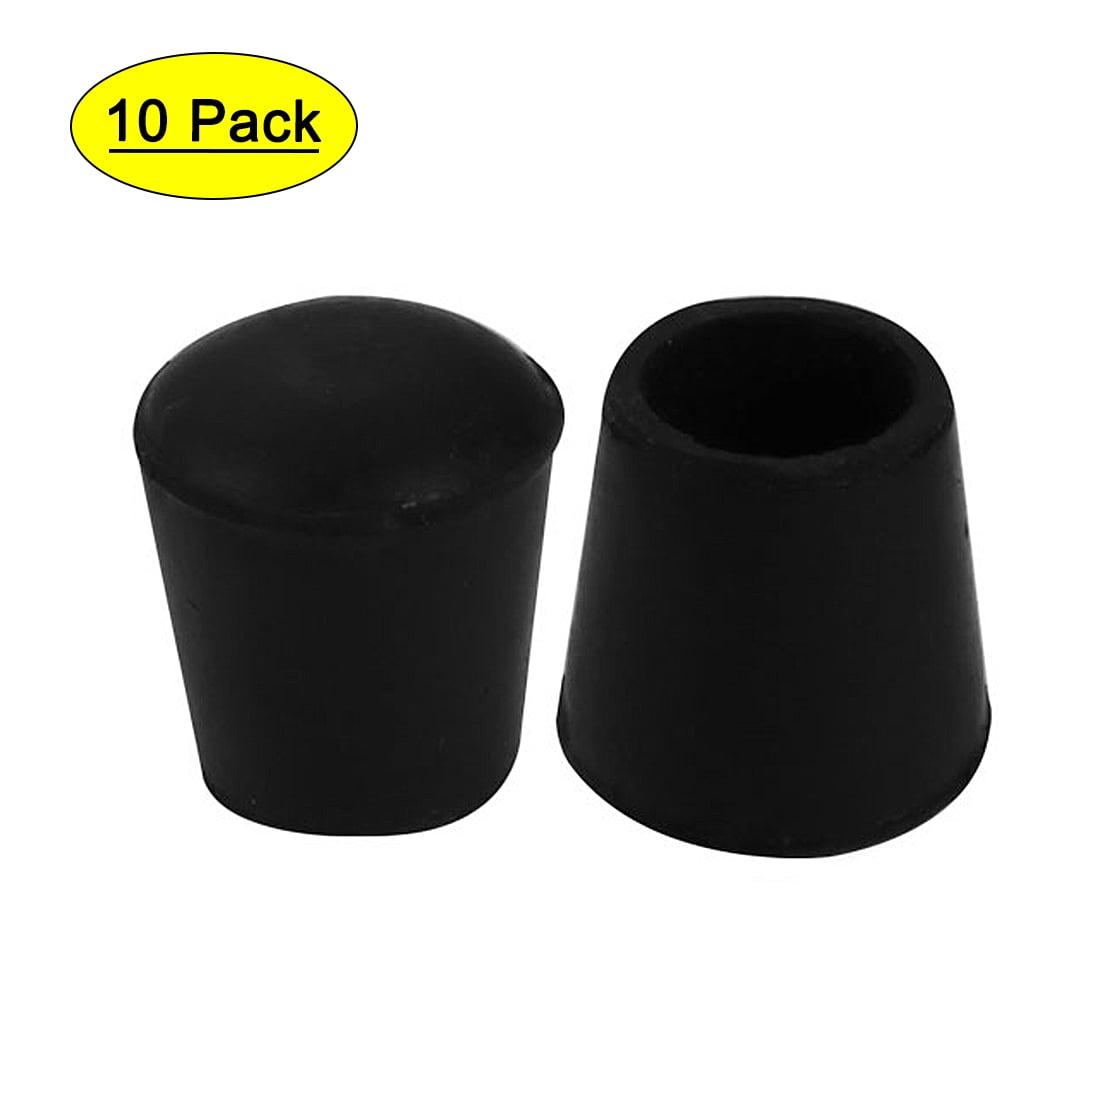 20 Pcs Black Cone Shaped Rubber Covers Furniture Foot Pads 23mm Dia 